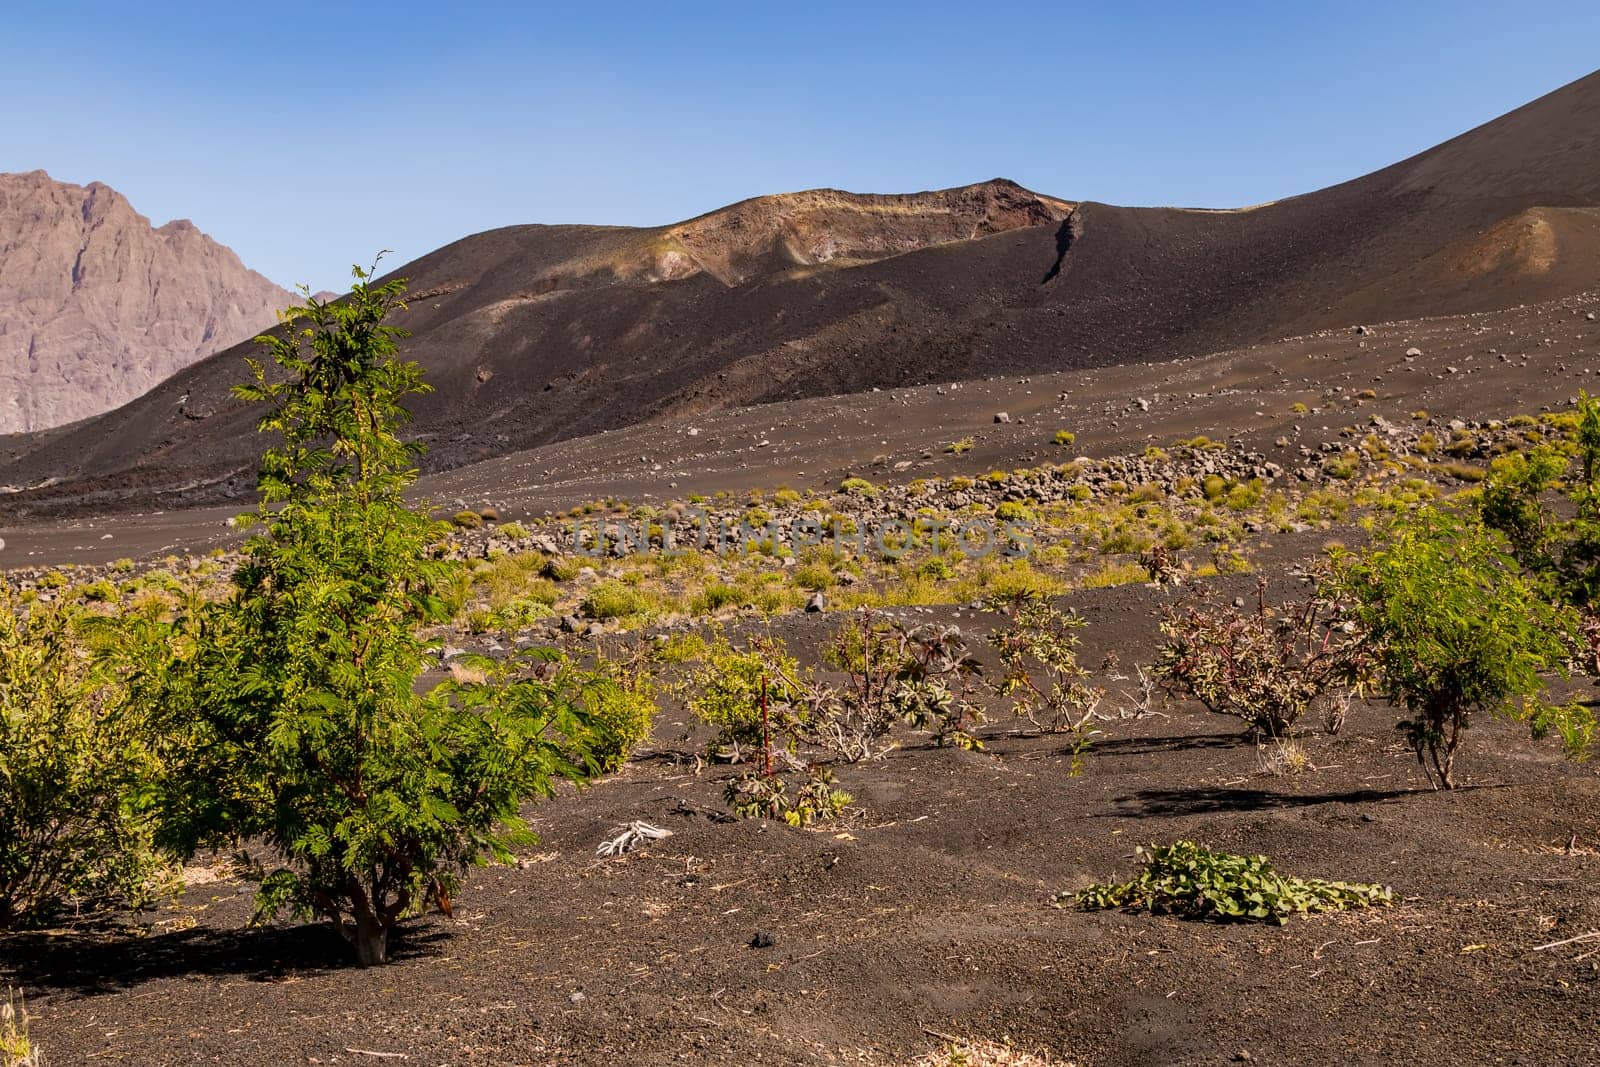 A secondary crater with lava boulders and grasses on the slope of Pico do Fogo on Fogo Island, Cape Verde Islands